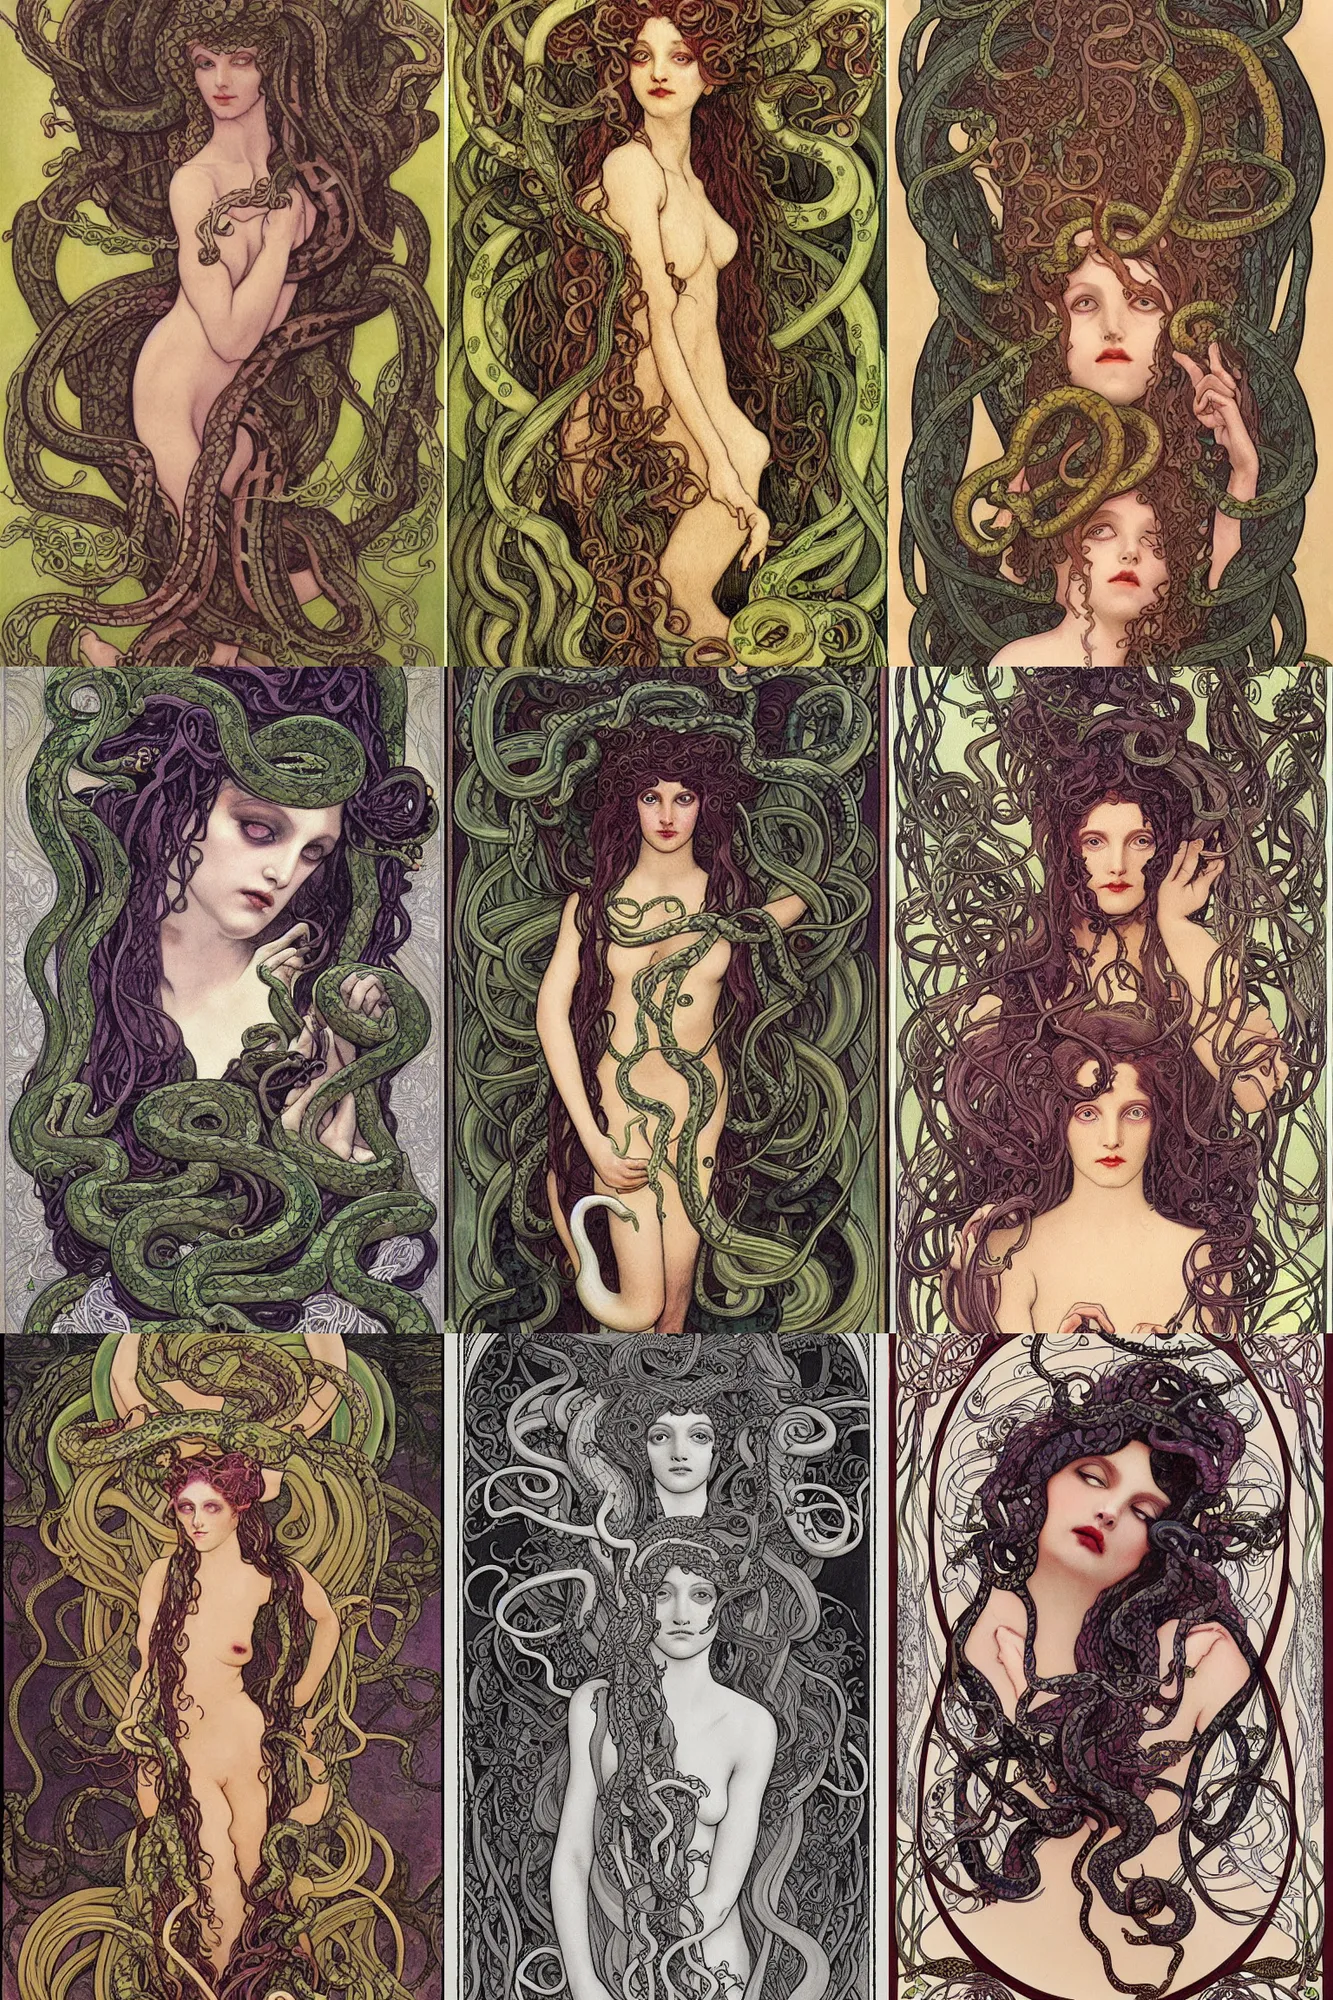 Prompt: scary Medusa with snakes for hair posing for an Alphone Mucha illustration painting Art Nouveau